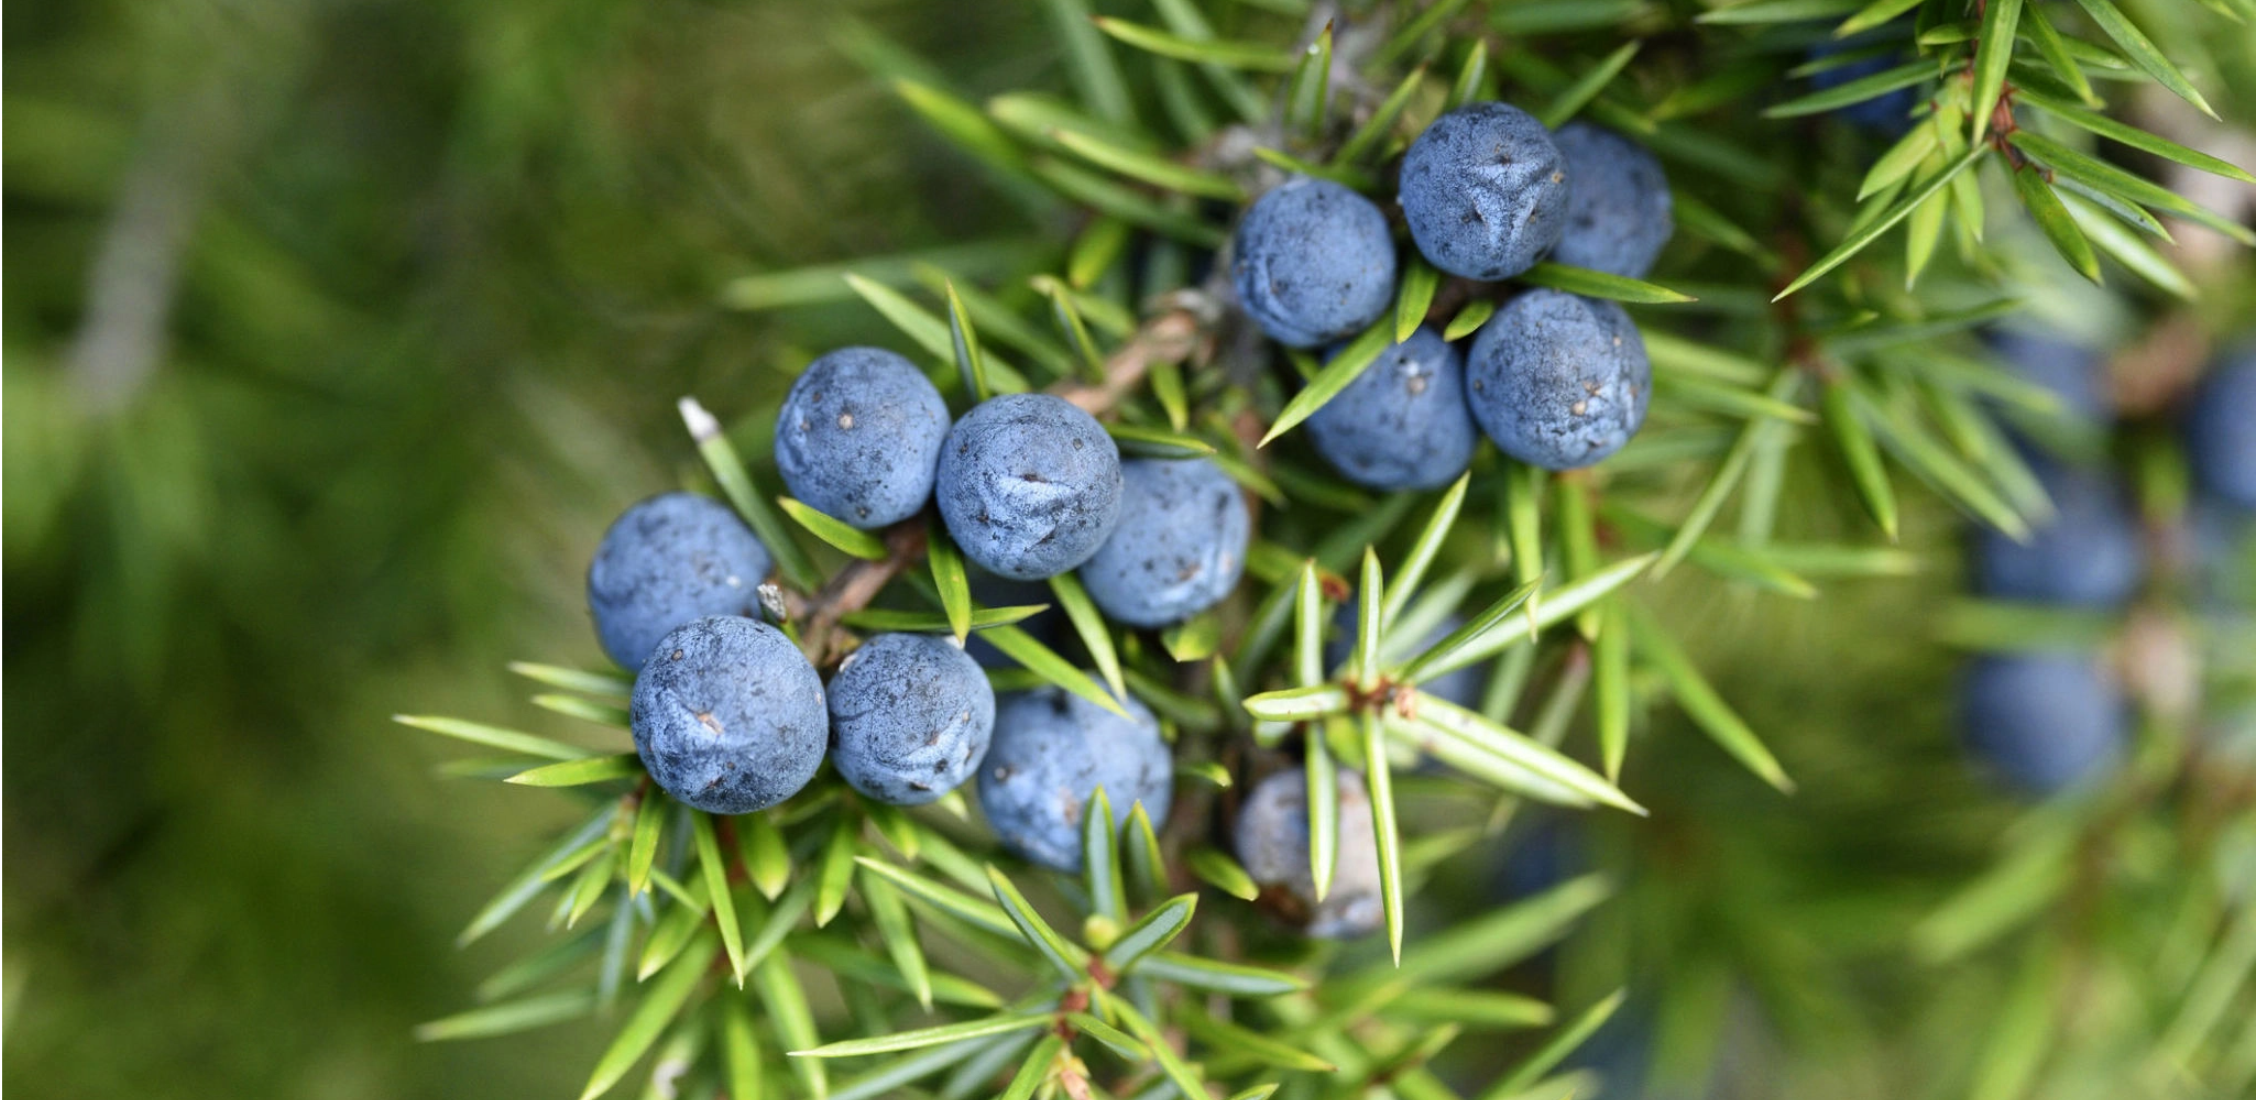 Contact us and ask us anything about our Gin - Juniper berries